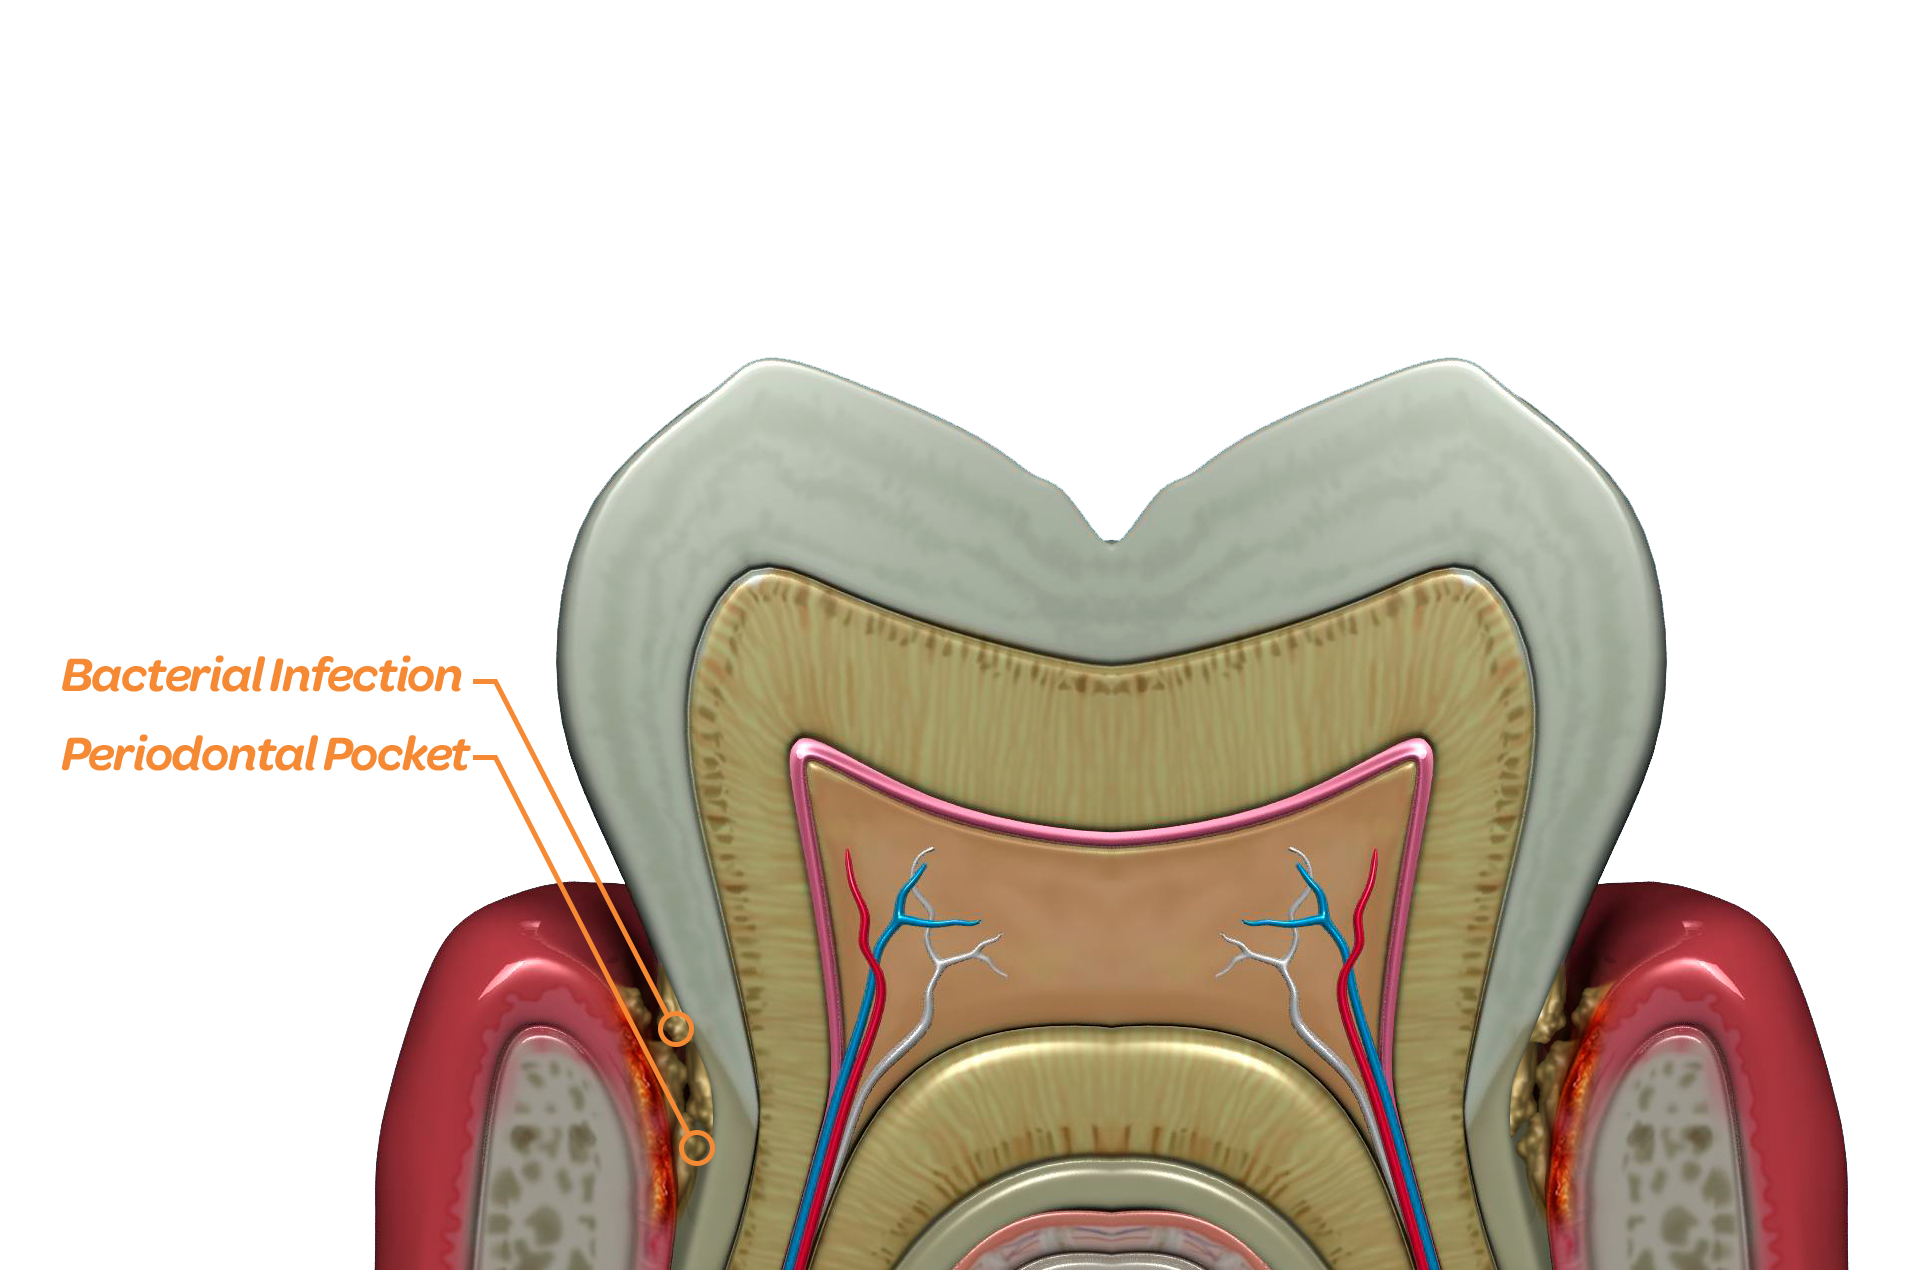 Bacteria thrive deep below the gum line in the periodontal pocket.